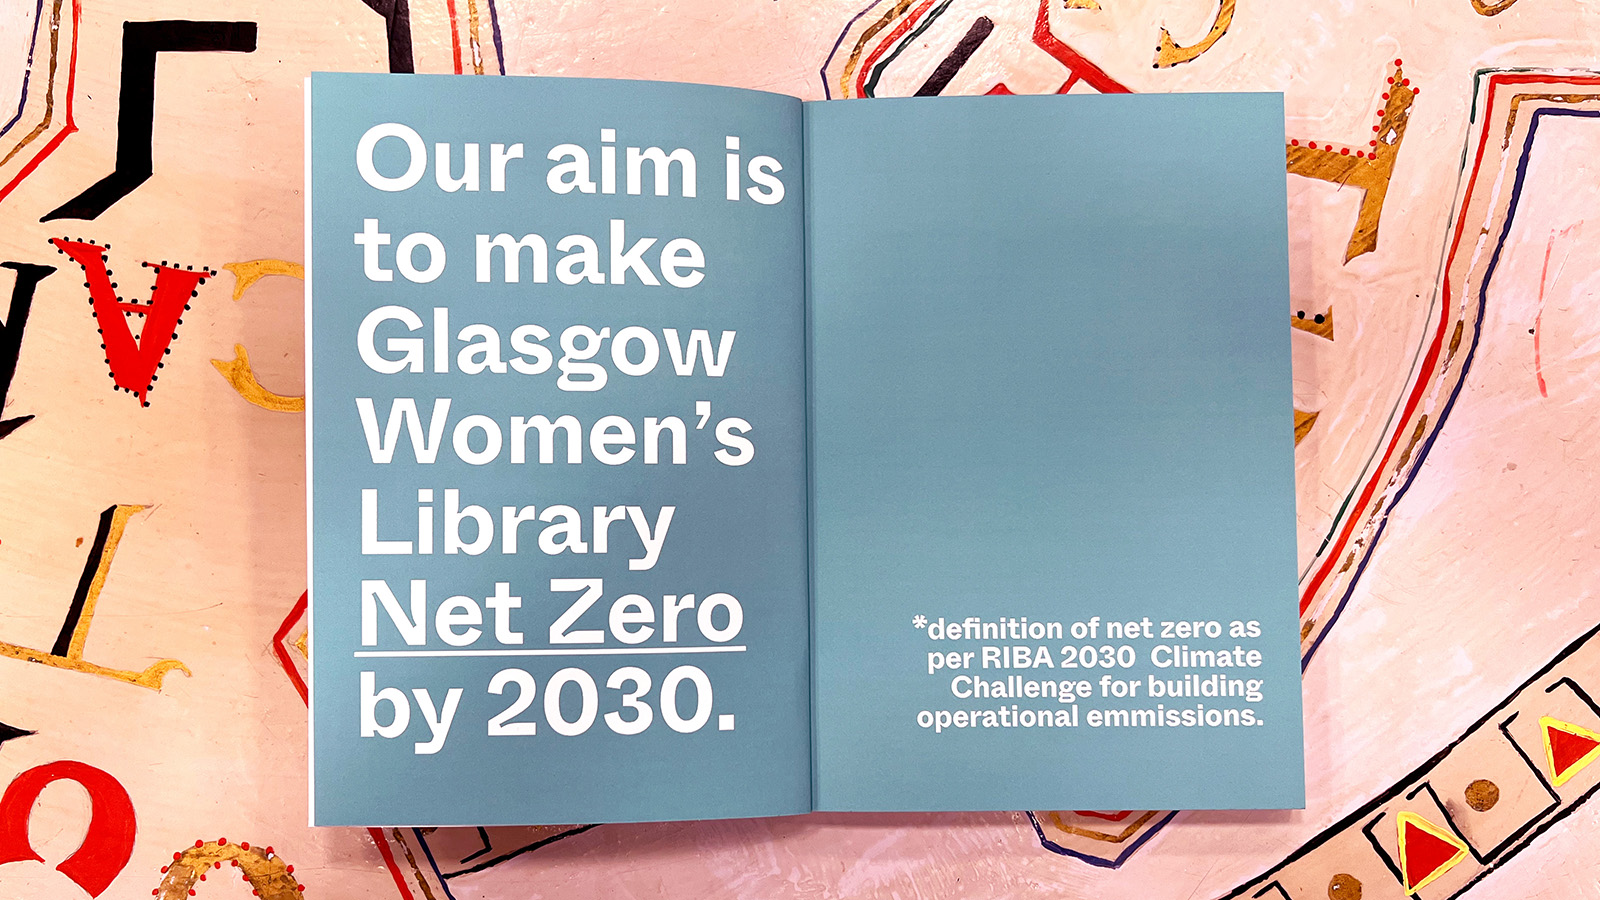 A book lies open, prominently displaying the words "Our aim is to make Glasgow Women's Library net-zero by 2030"